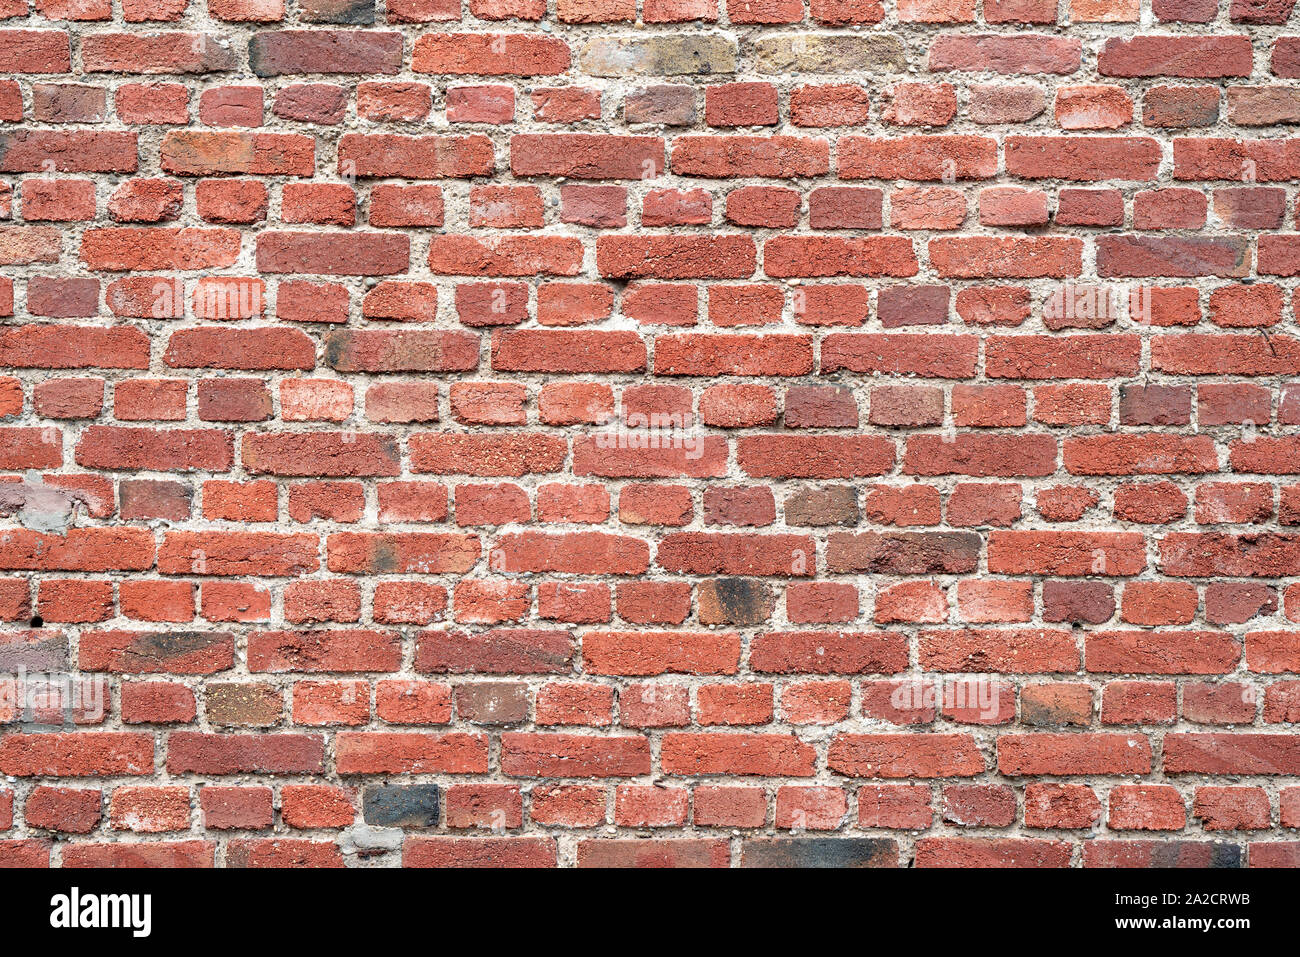 Old red brick wall as background or texture Stock Photo